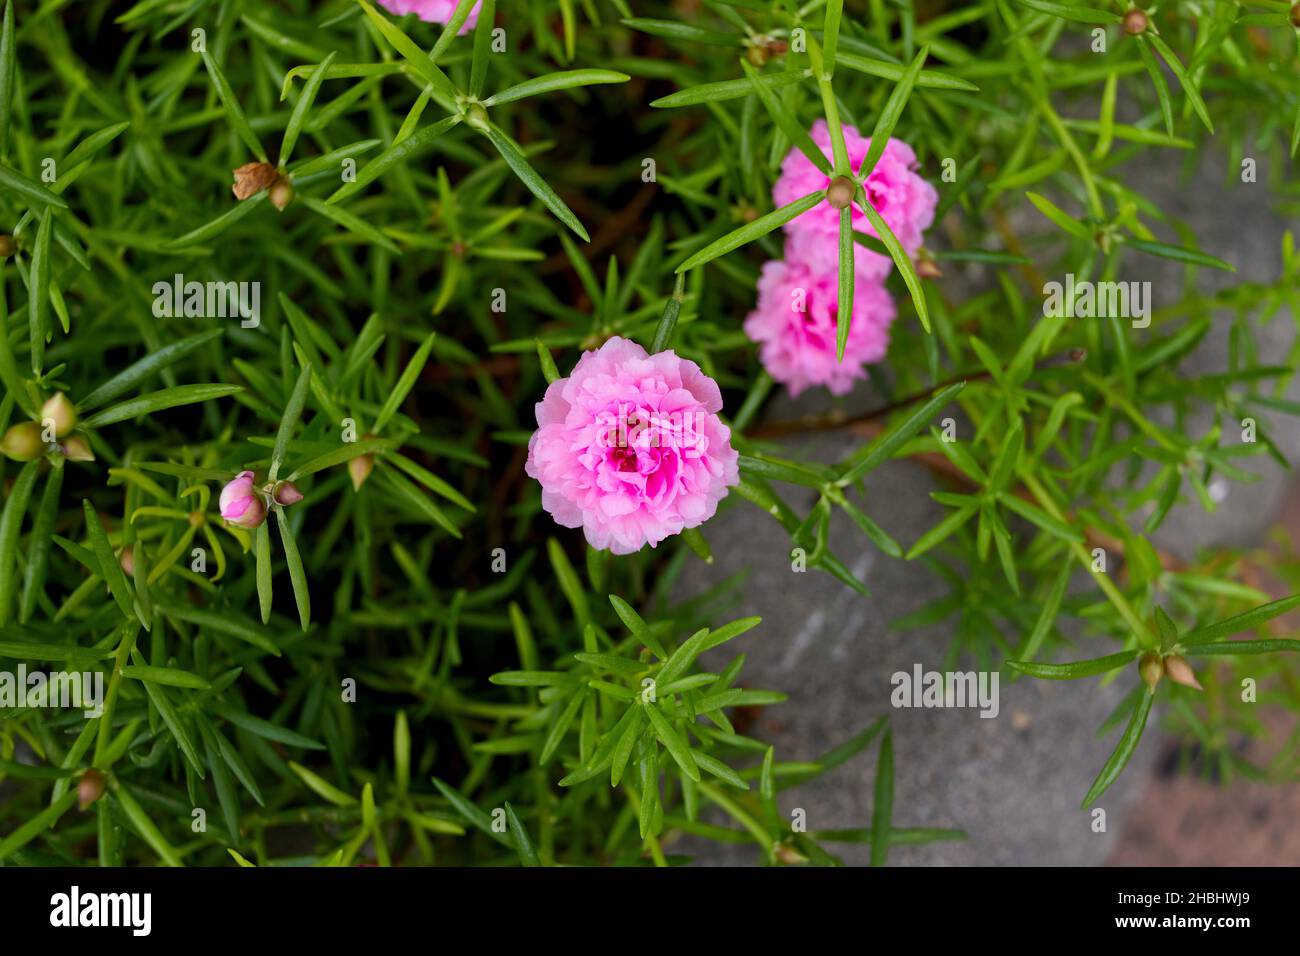 Pink Common Purslane bloomin on green leaves Stock Photo